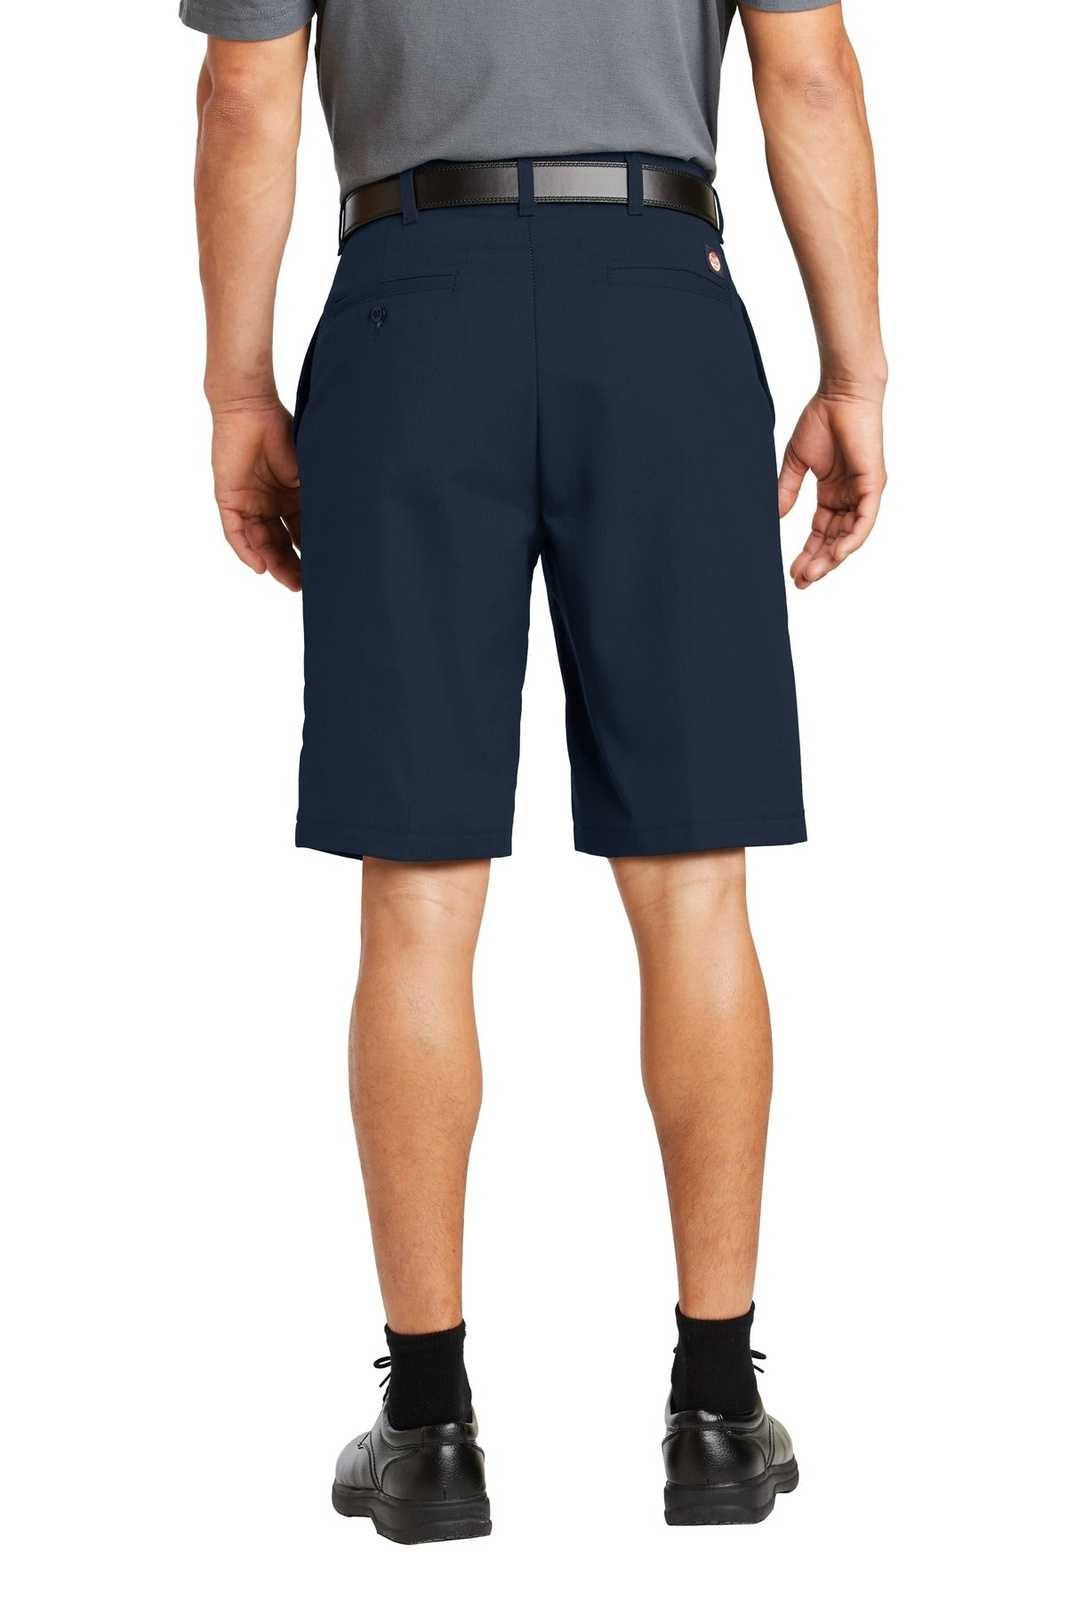 Red Kap PT26 Industrial Work Short - Navy - HIT a Double - 2